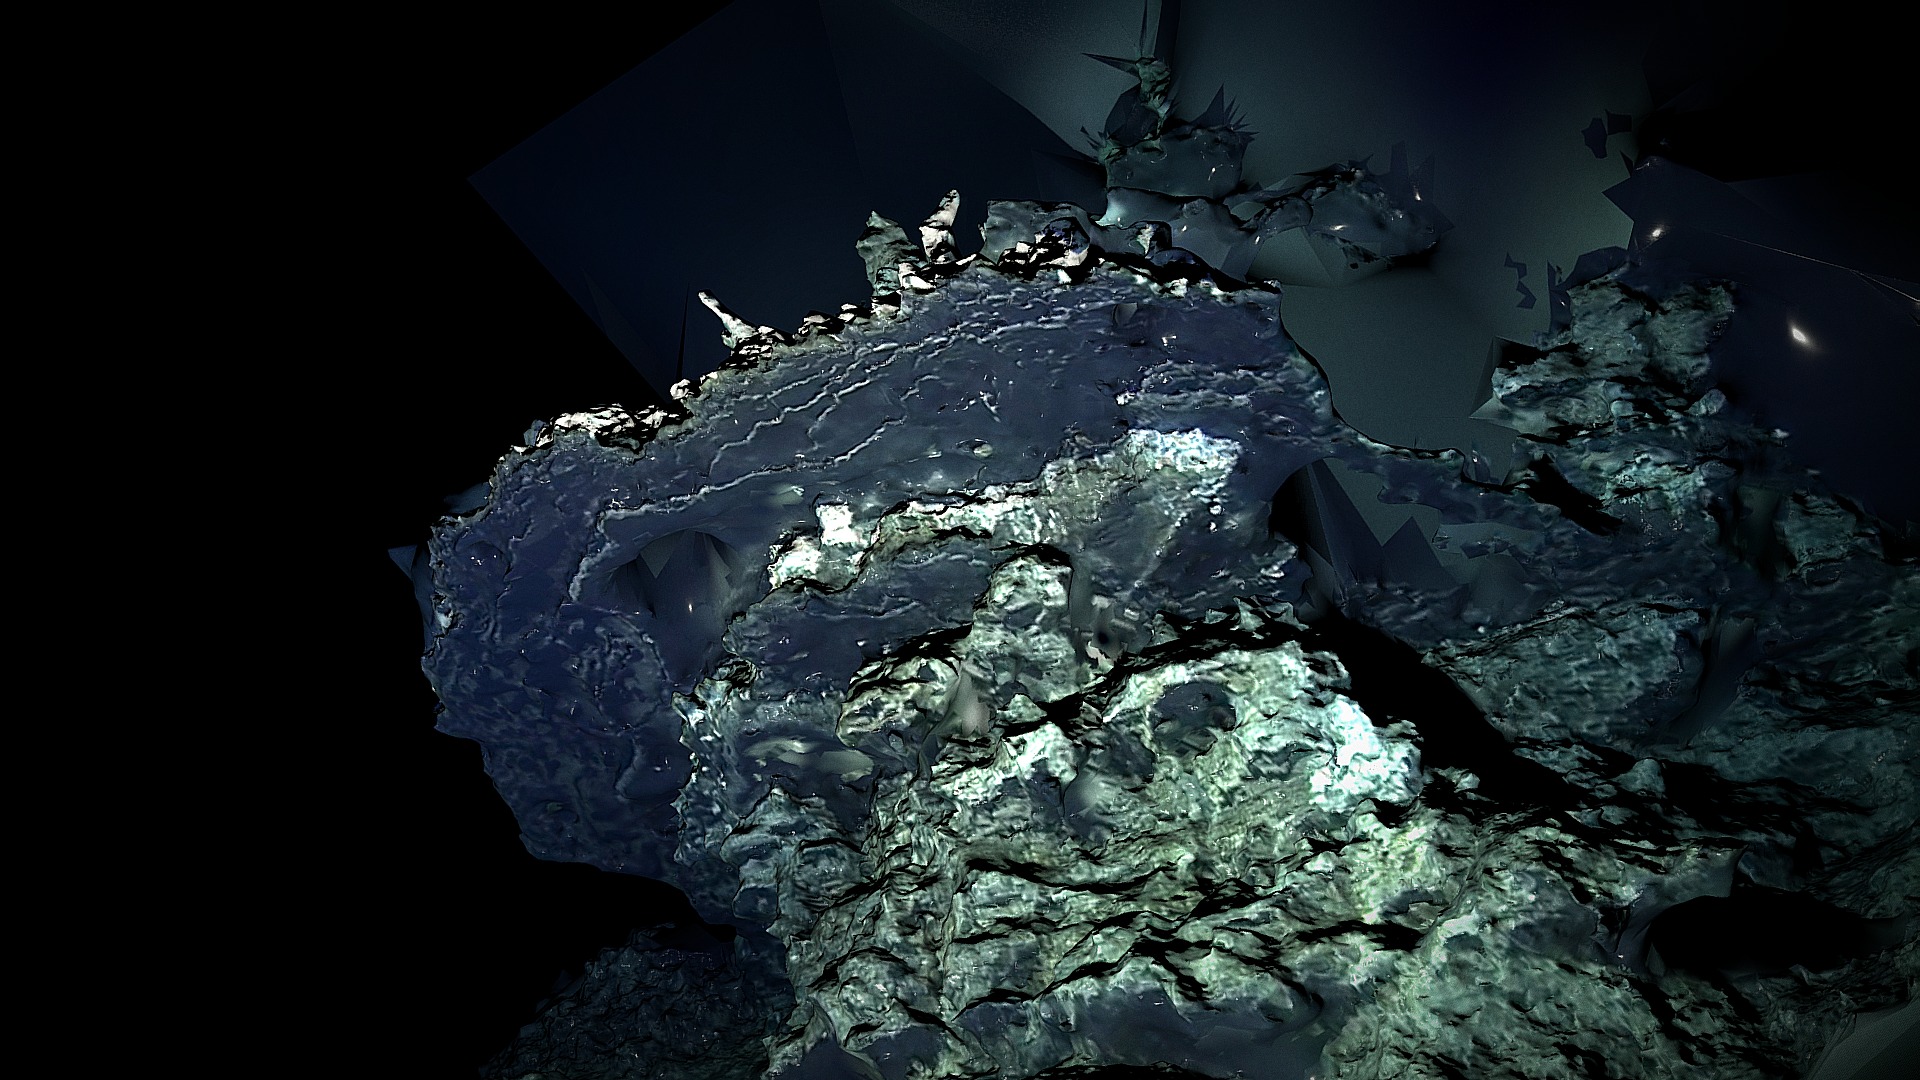 3D model Low Poly Deep Sea Hydrothermal Vent #8 - This is a 3D model of the Low Poly Deep Sea Hydrothermal Vent #8. The 3D model is about a large rock with crystals.